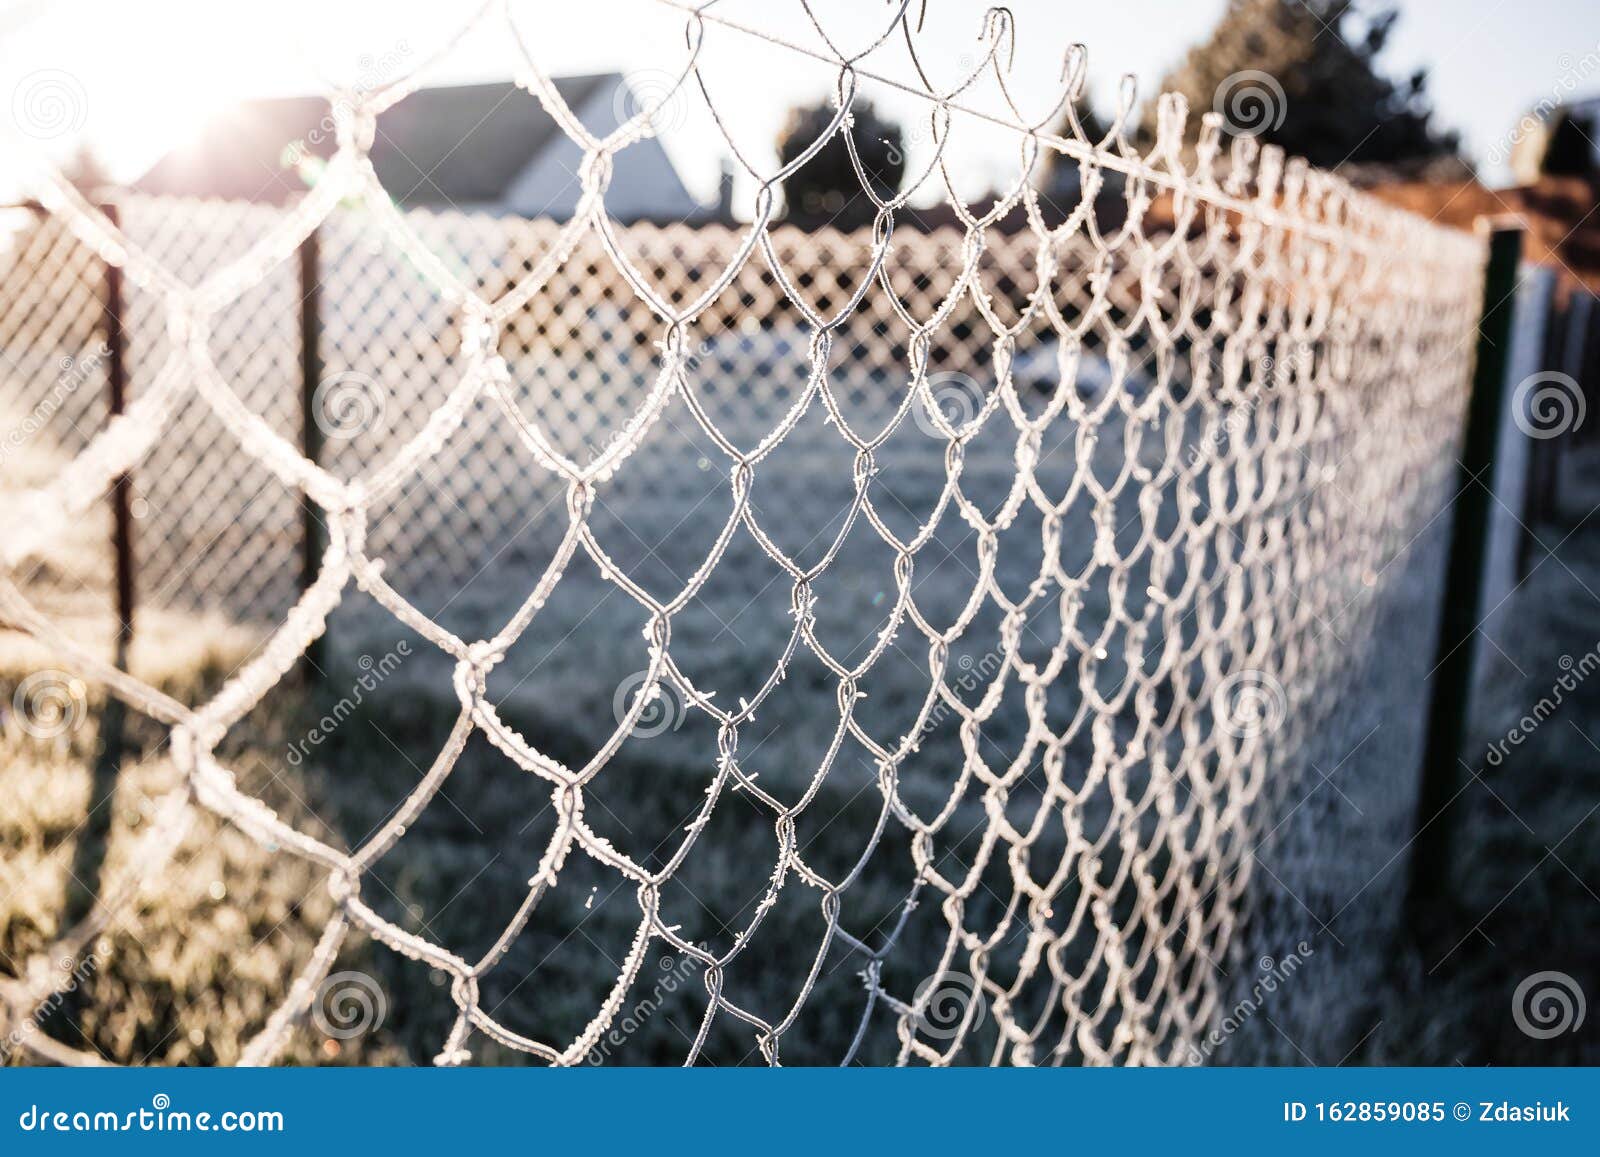 Metallic Chain Fence Link Net With Blue Defocused Background. Frosty ...
